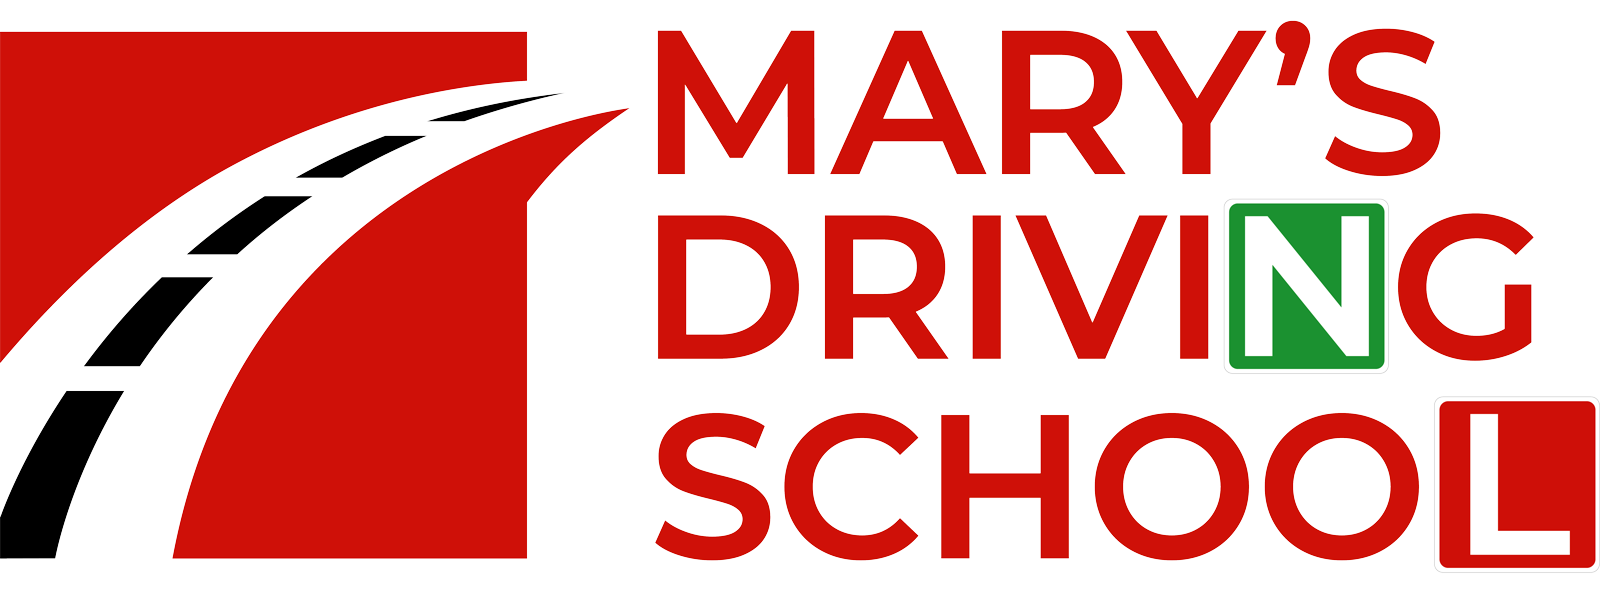 mary's driving school victoria bc, driving lessons victoria bc